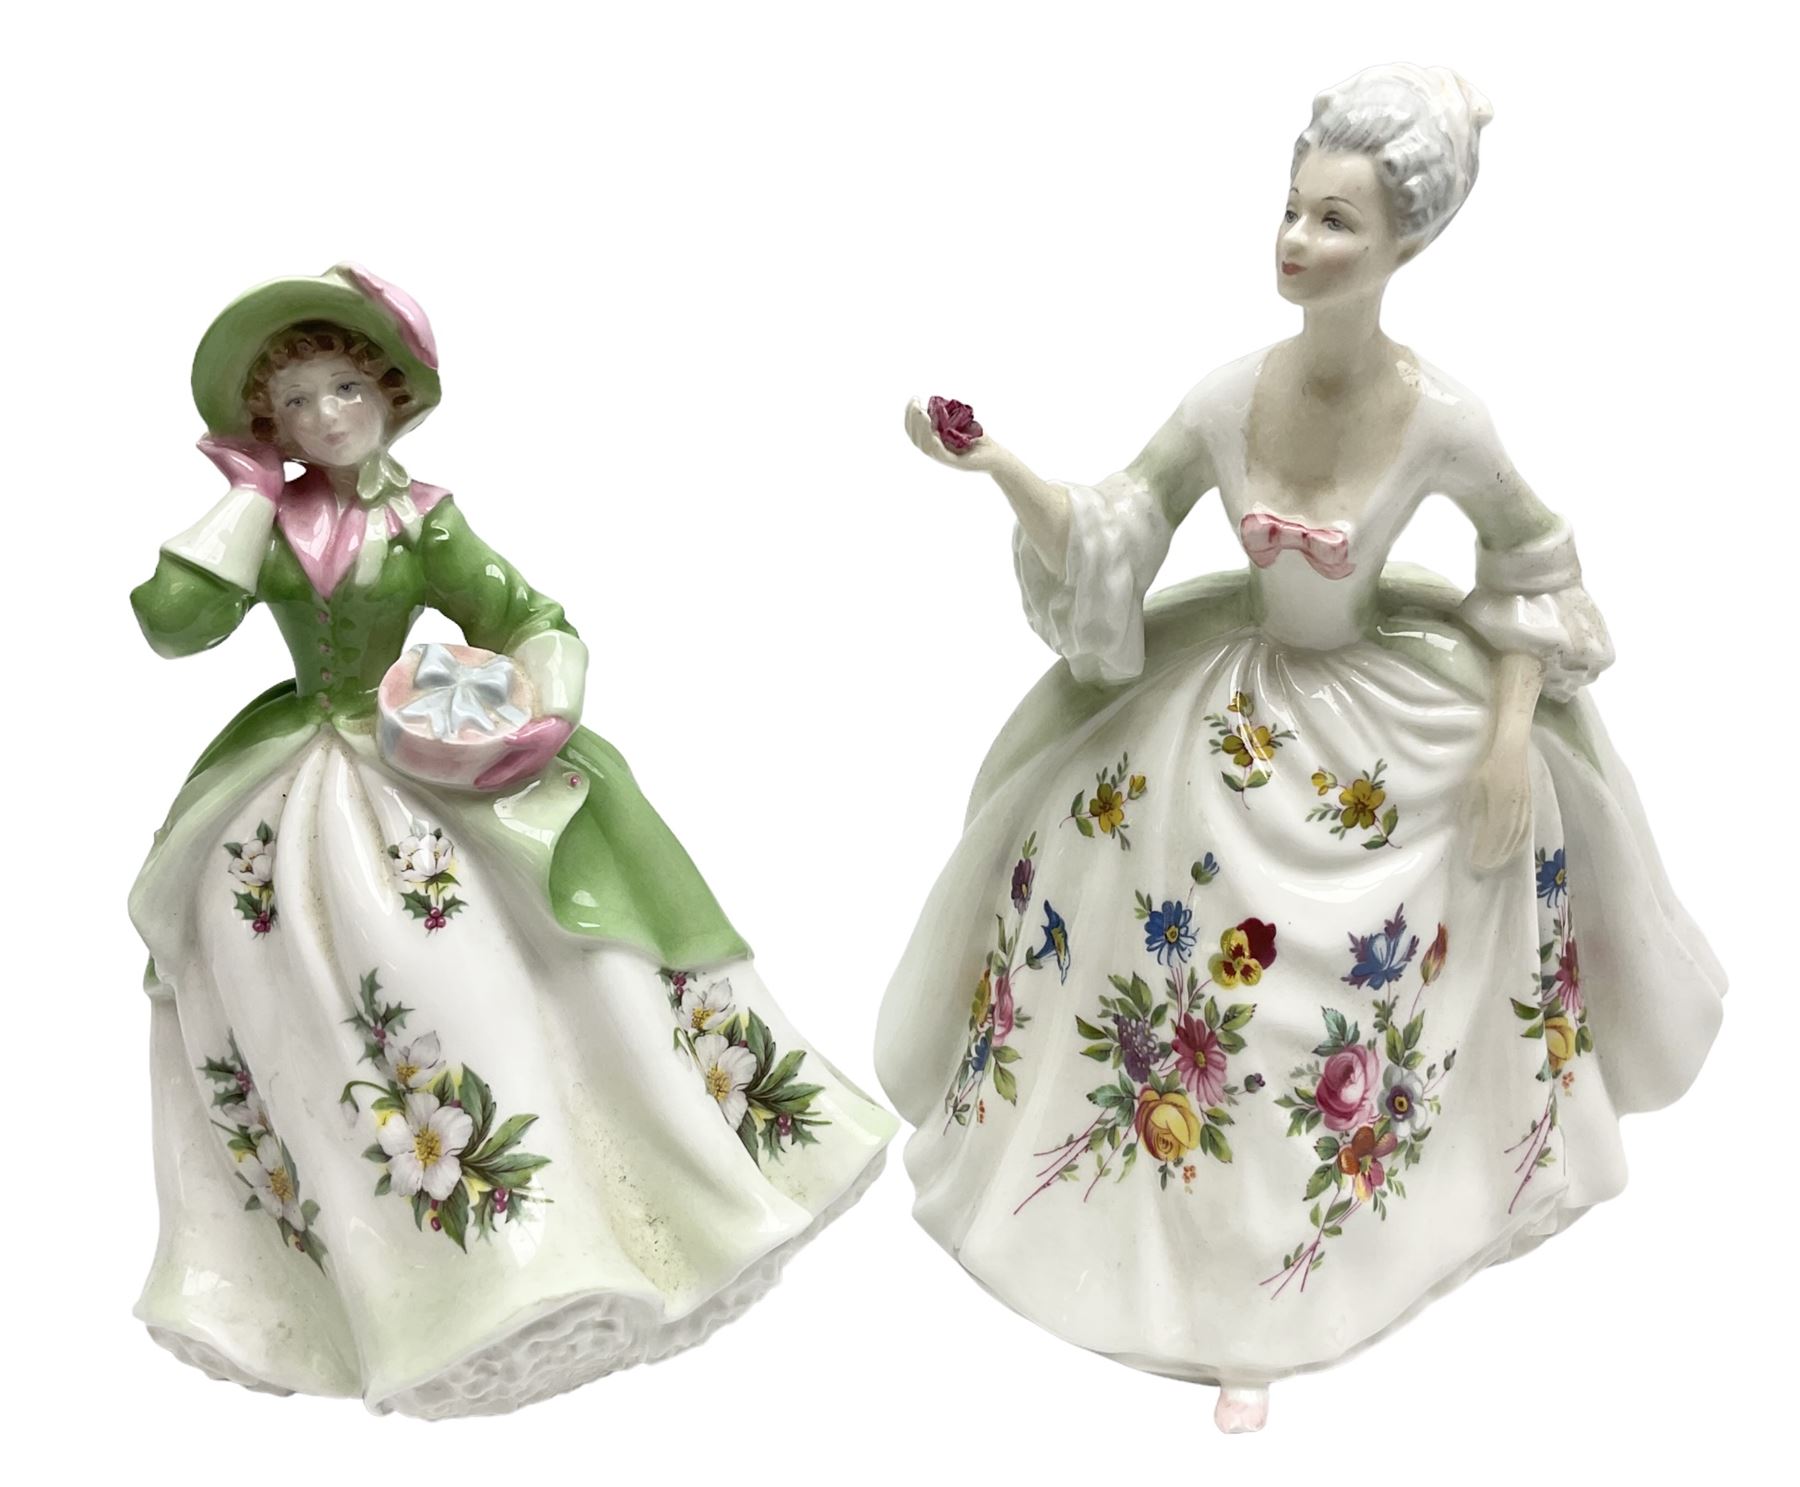 Royal Worcester figure Sweet Holly no 5481 together with Royal Doulton figure Diana n HN2468